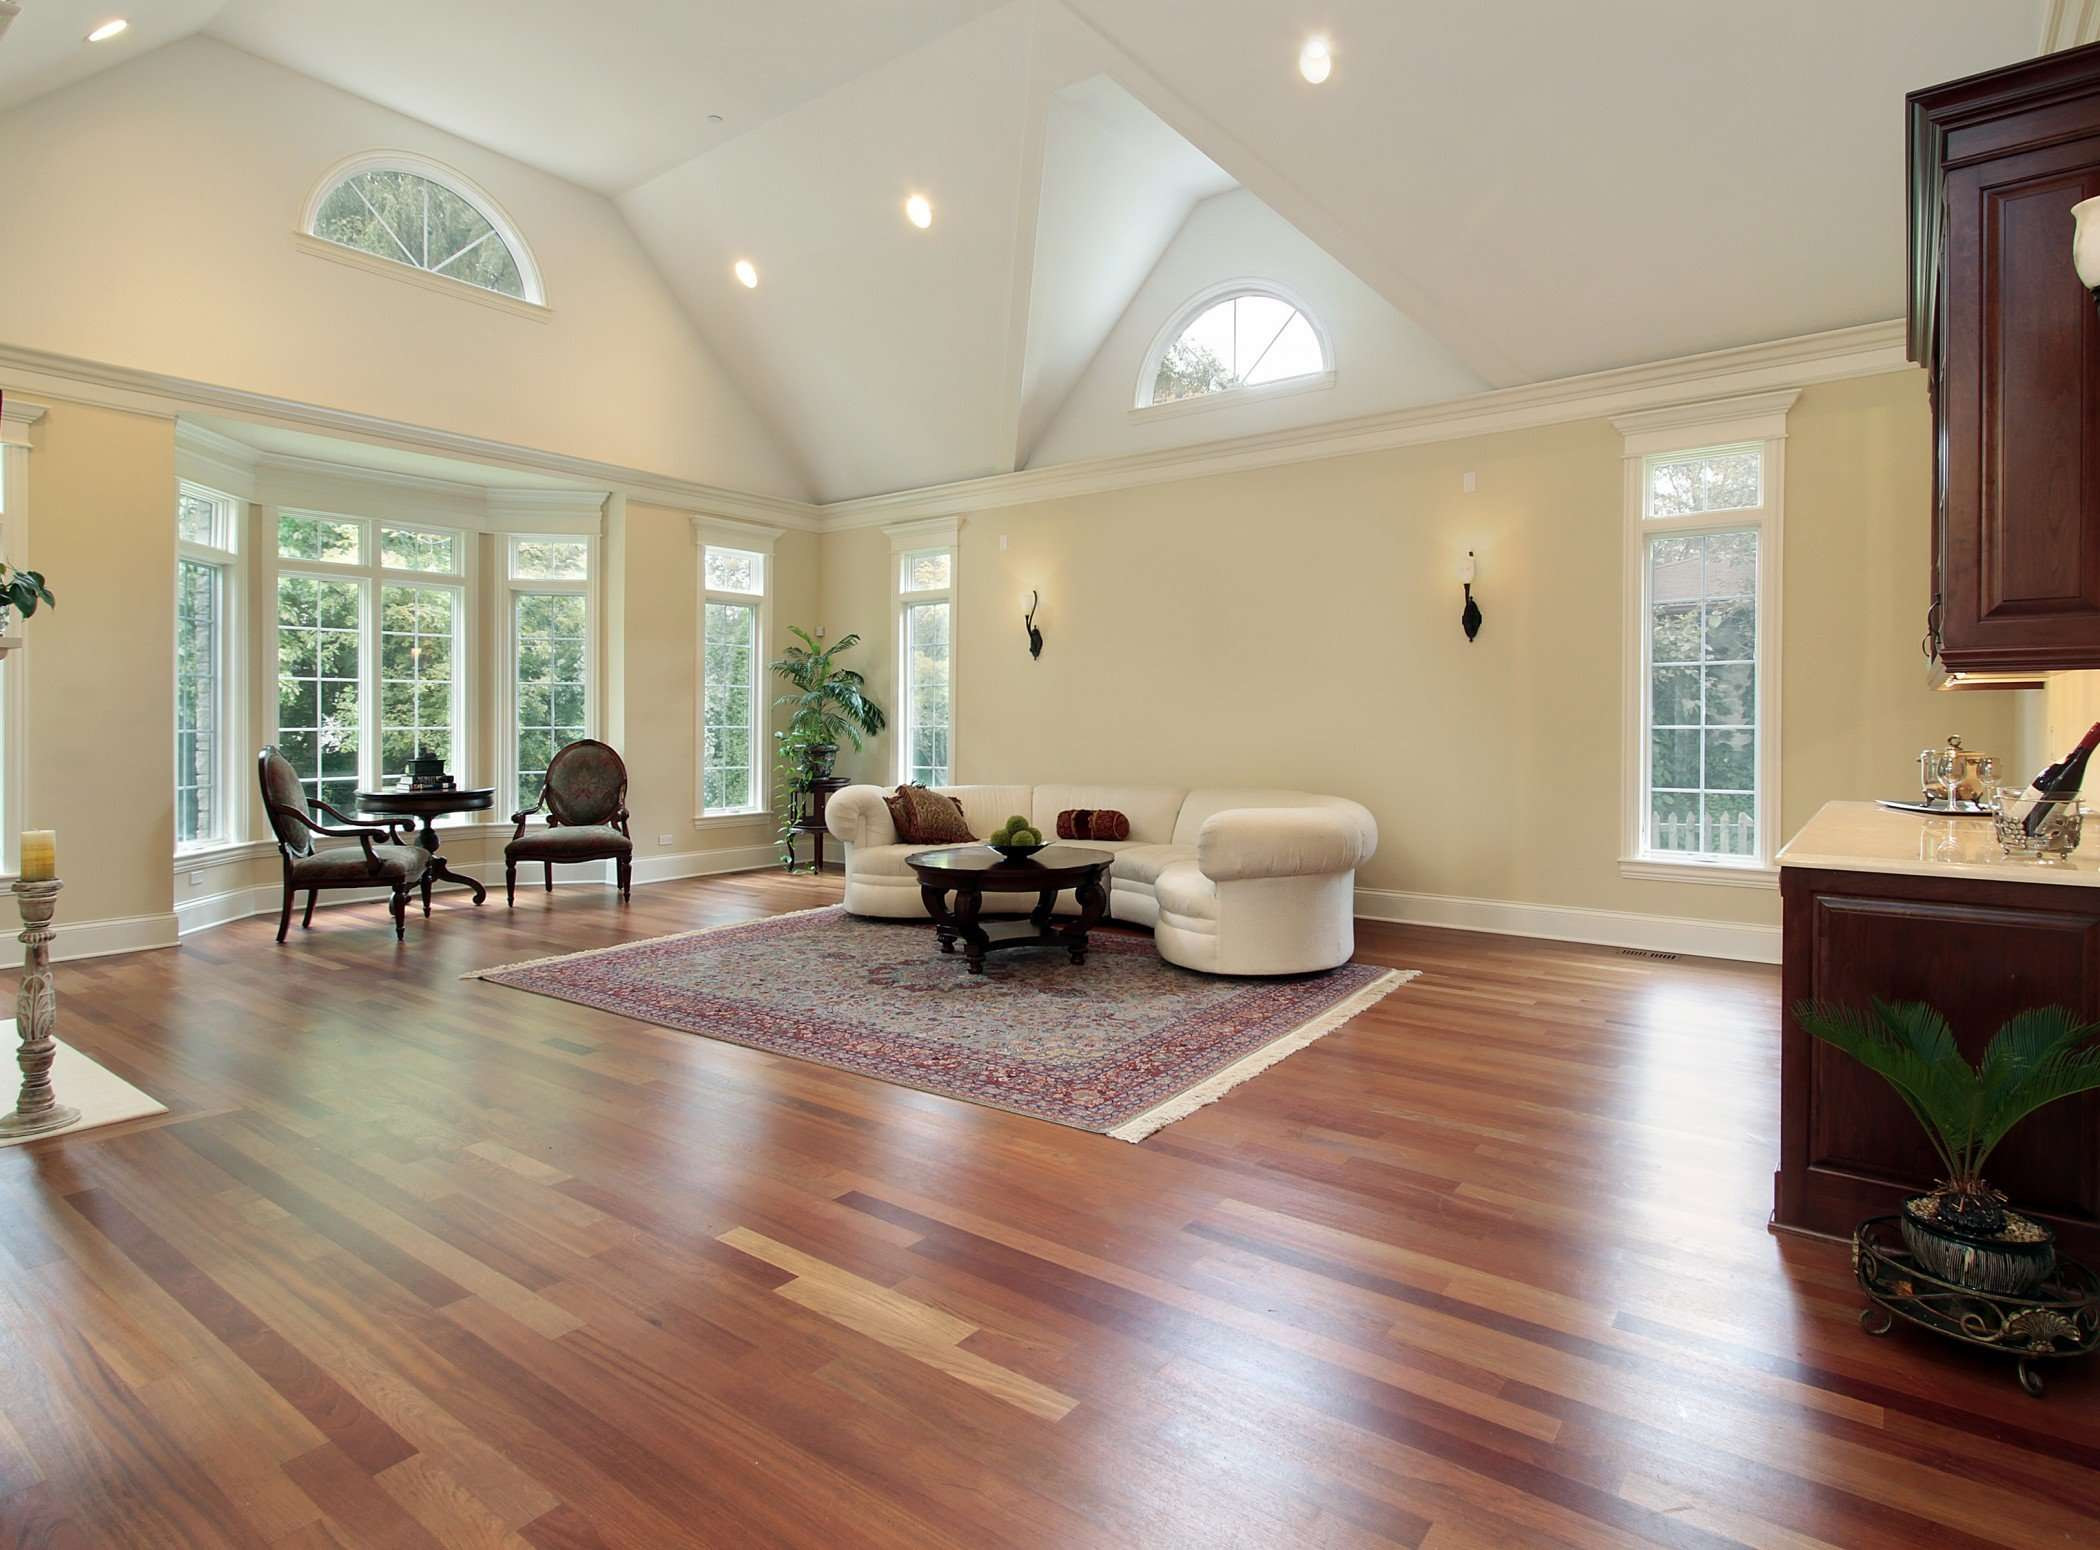 27 Unique Average Cost for Hardwood Floor Installation Per Square Foot 2024 free download average cost for hardwood floor installation per square foot of wood floor price lists a1 wood floors pertaining to perths largest range of wood floors